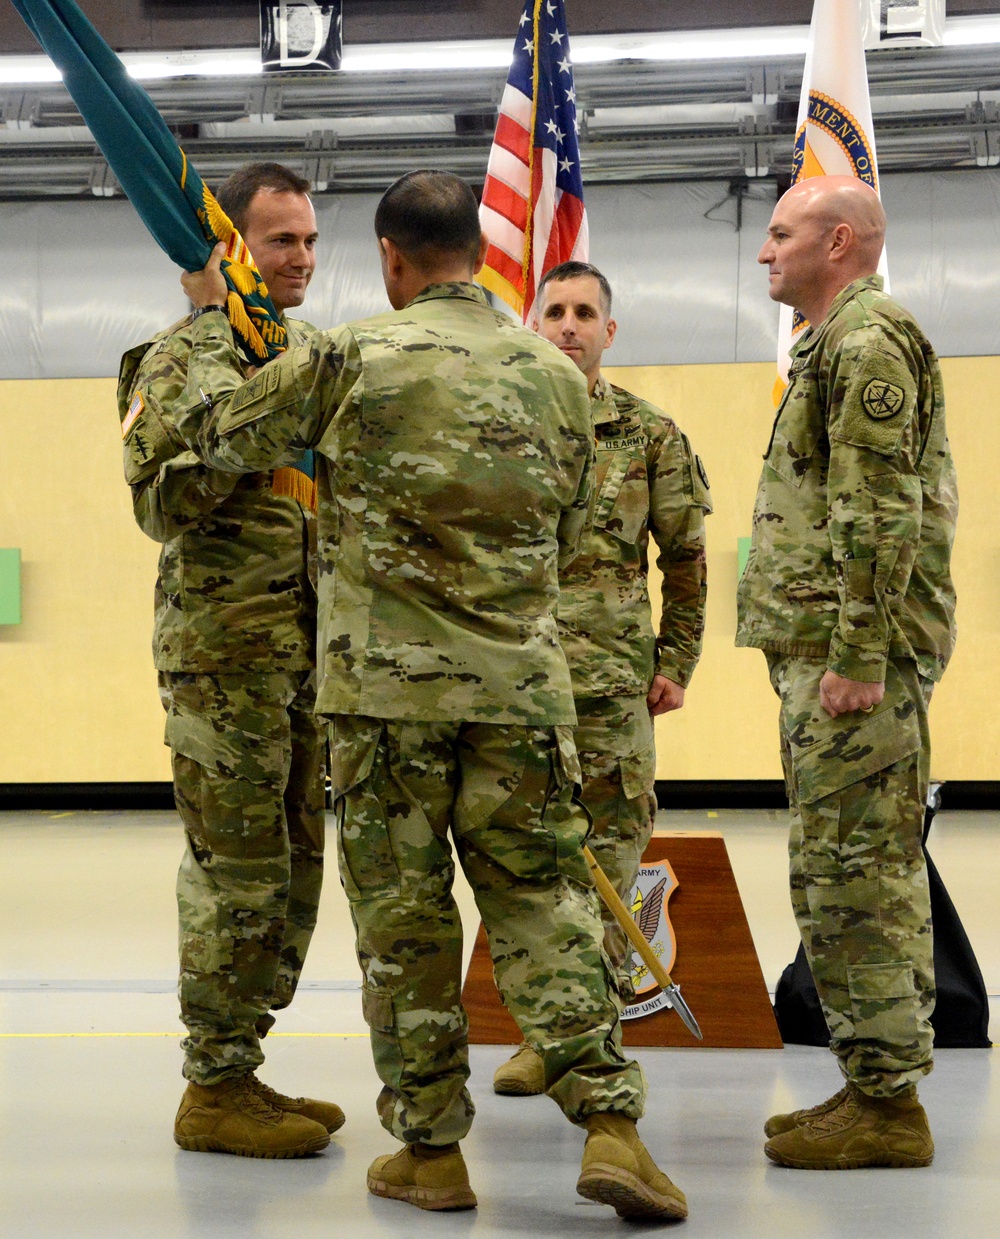 New commander takes charge at USAMU